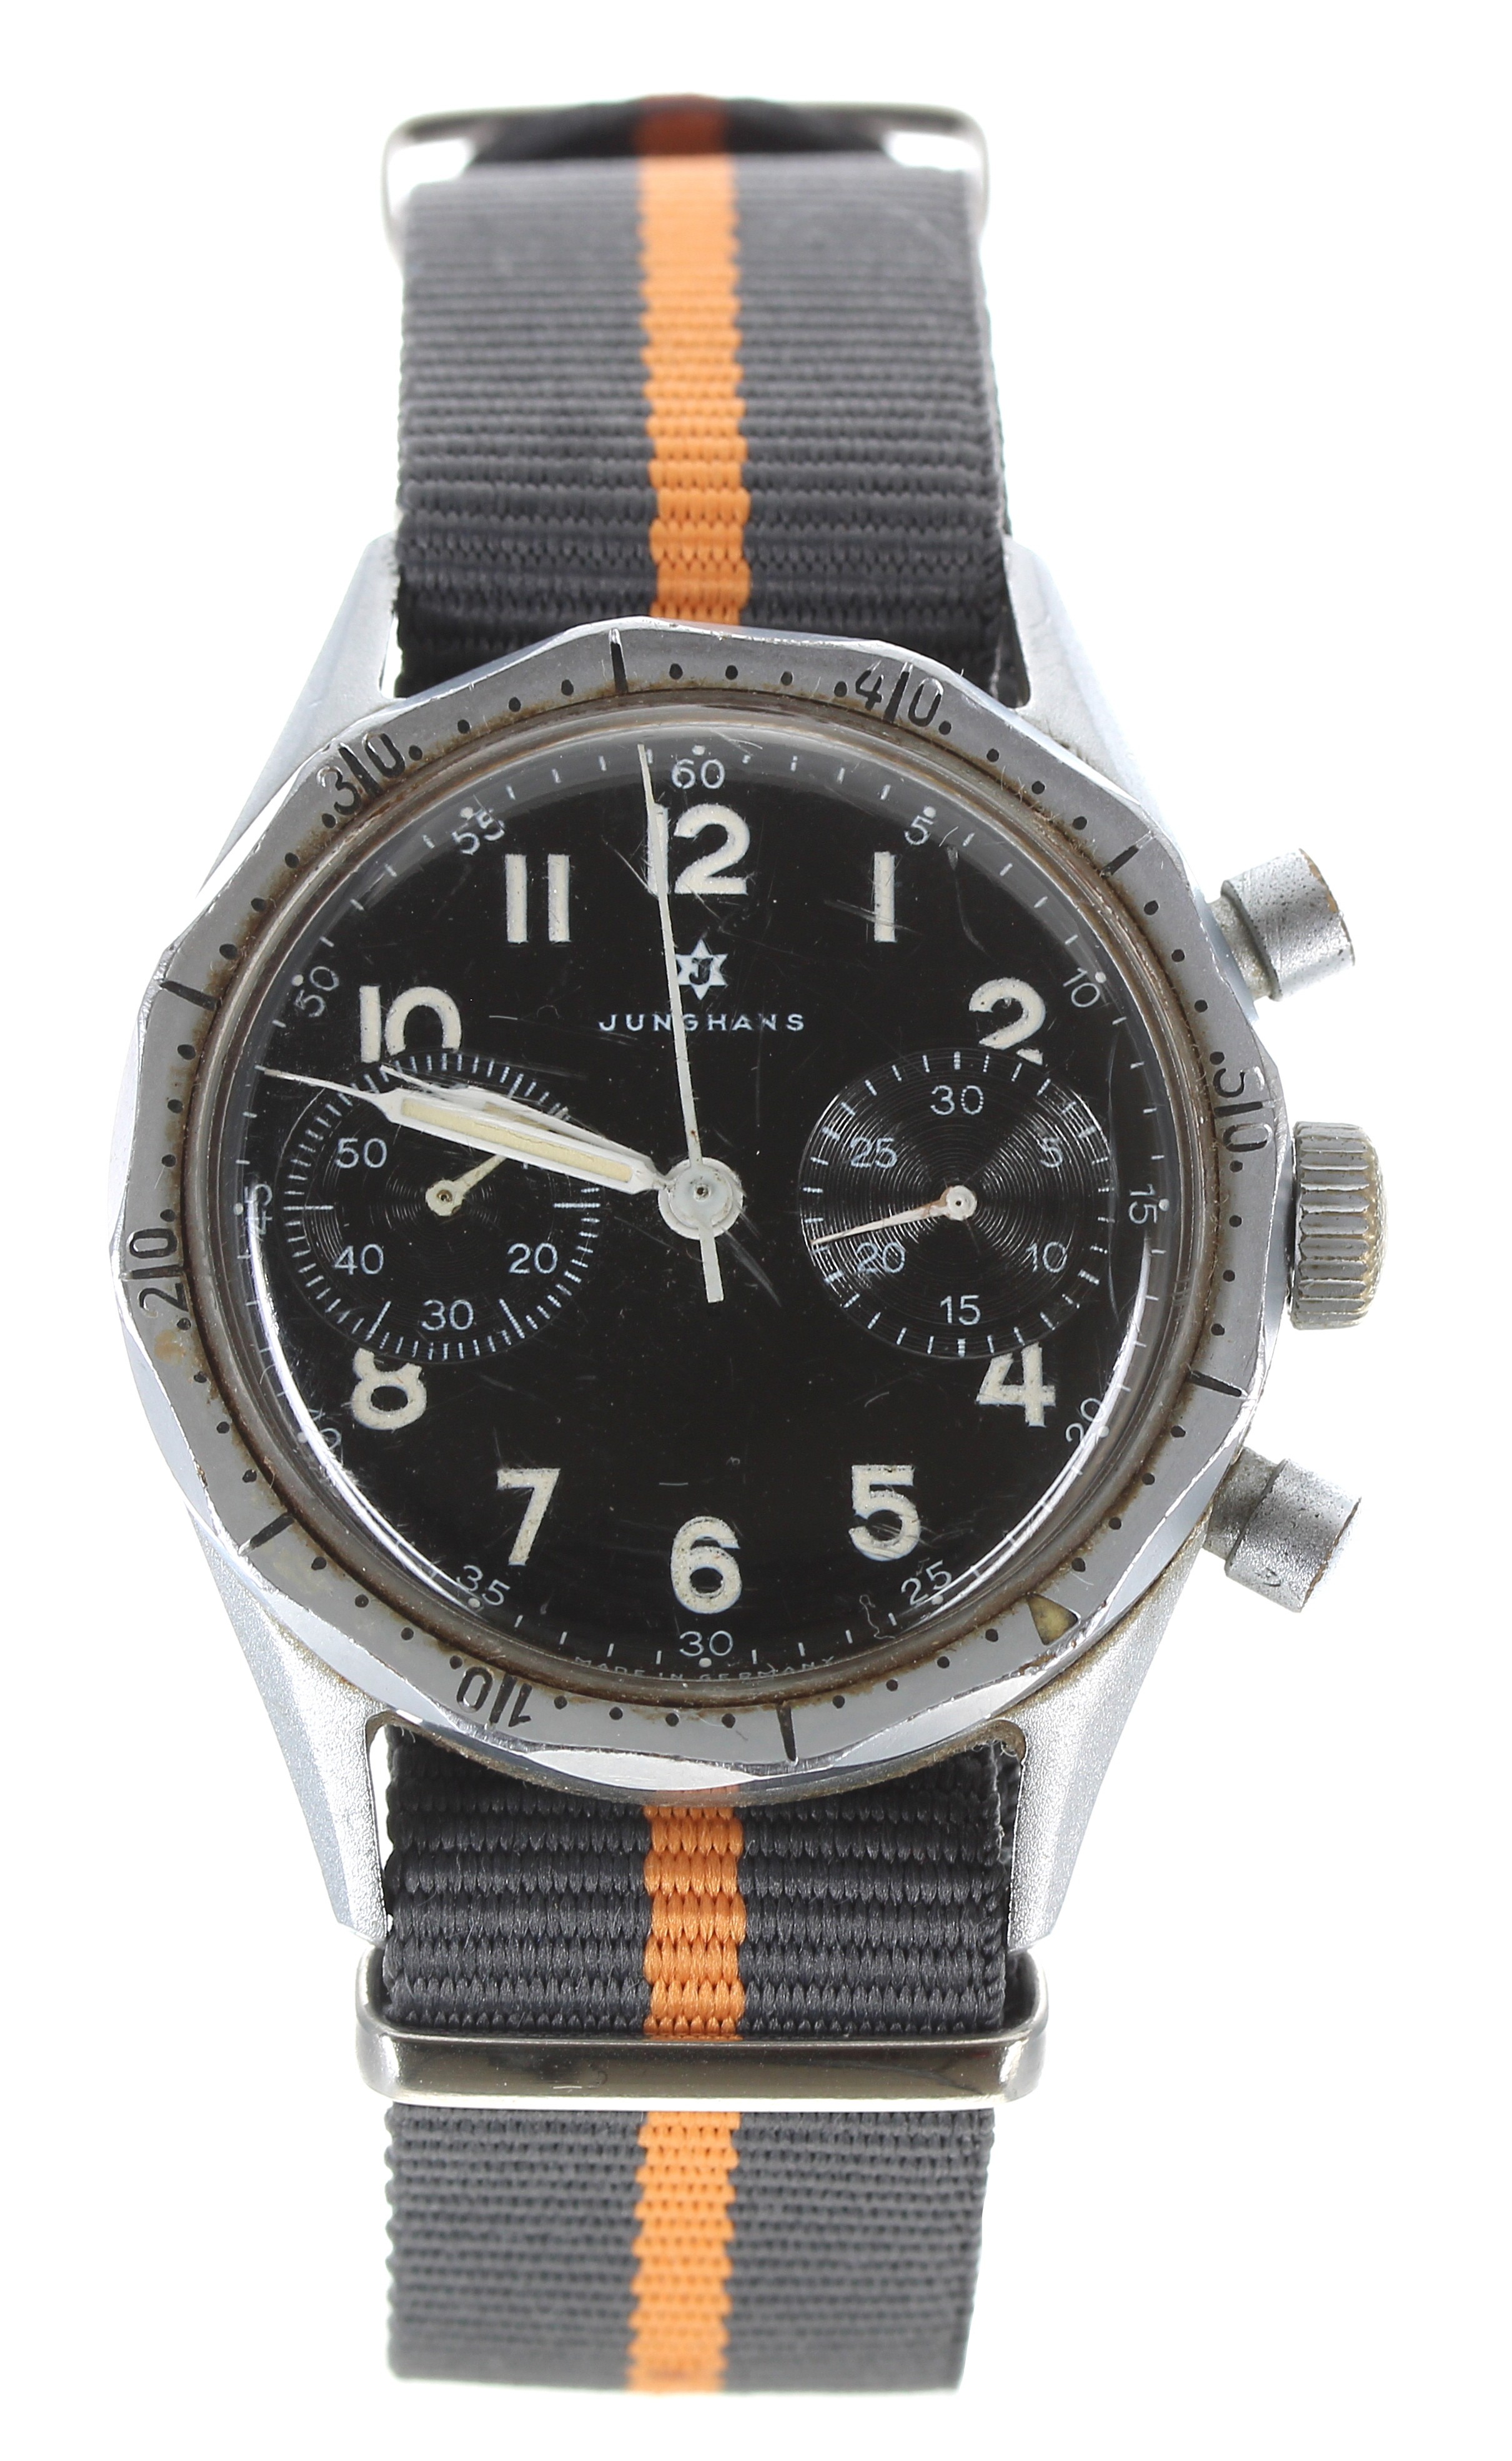 Junghans Type 88 German Military issue chronograph Pilot's nickel plated and stainless steel